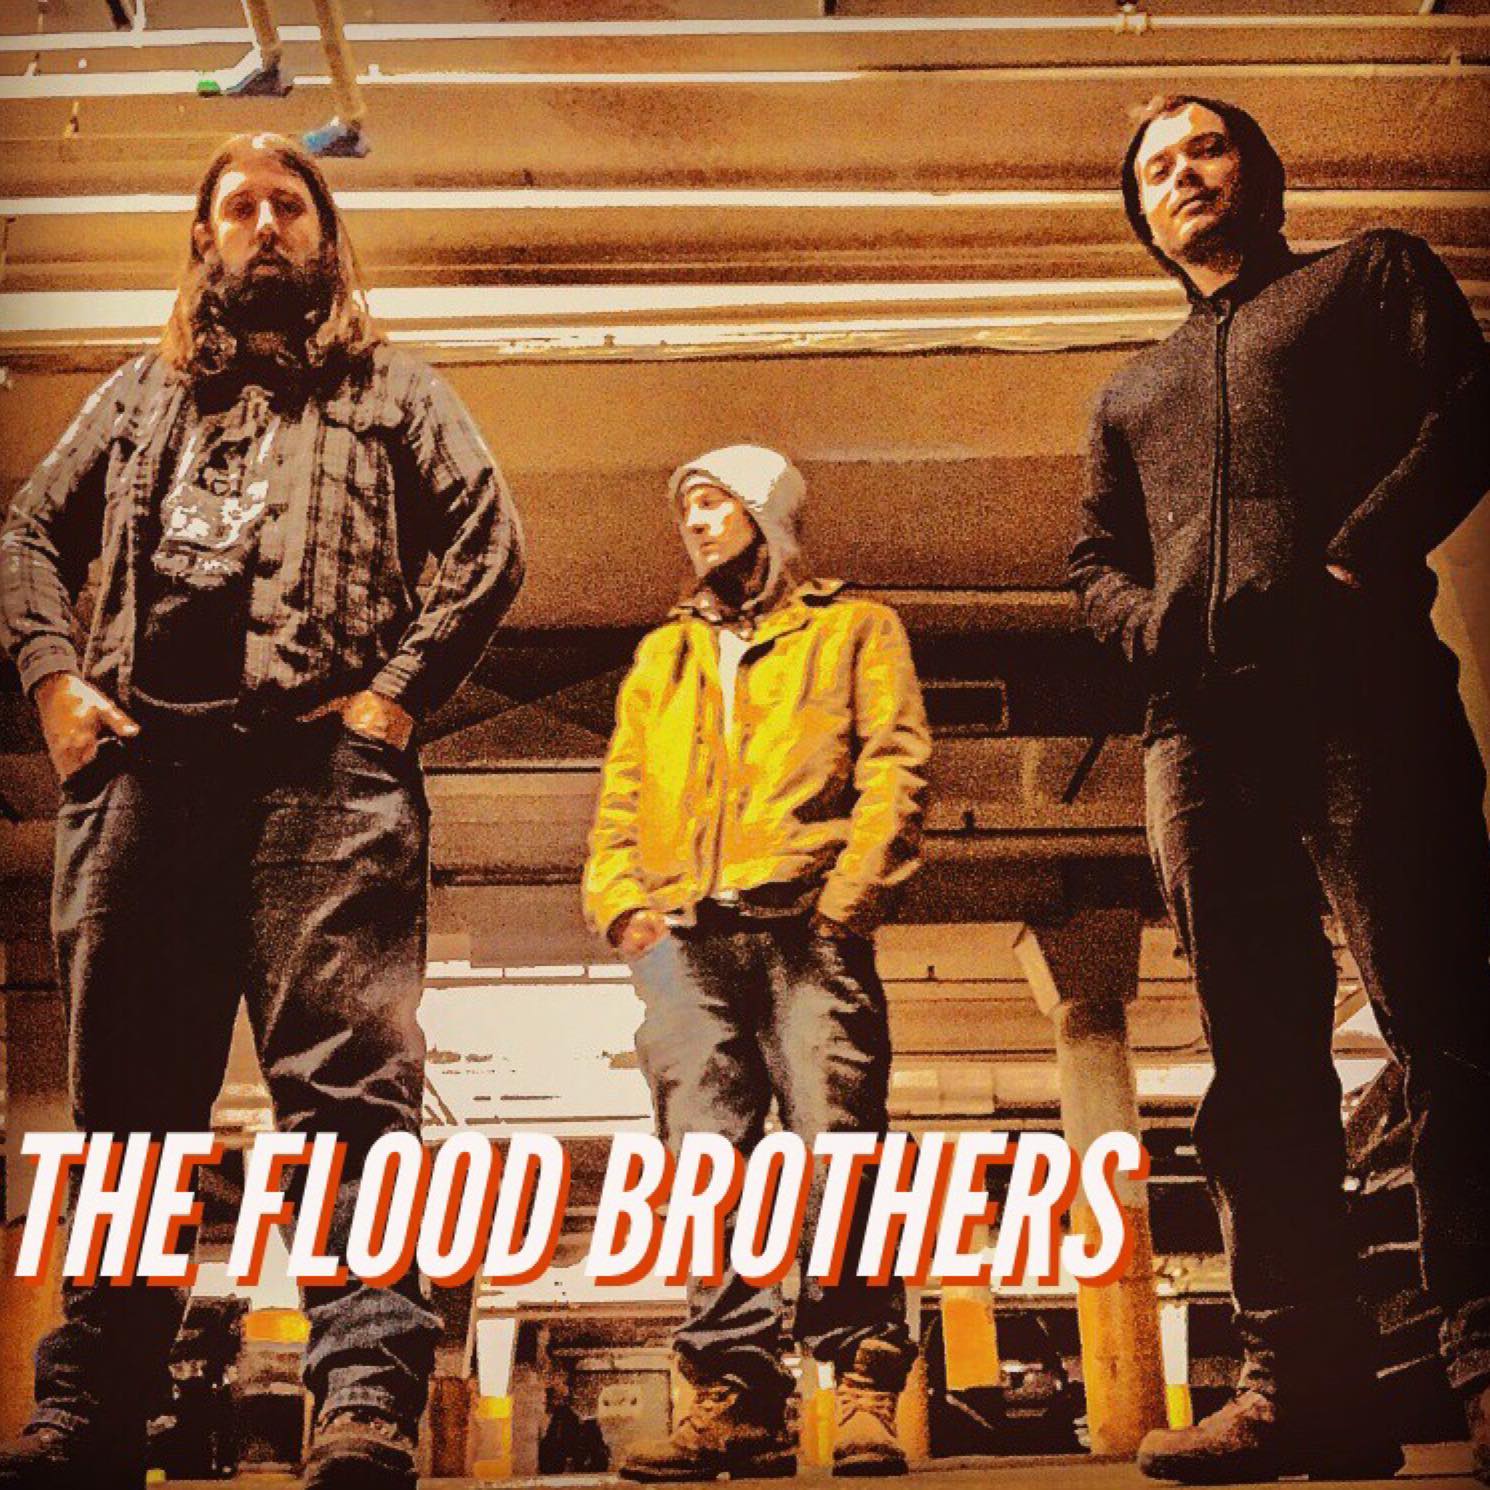 The Flood Brothers shake up The Mission | Central Mo News